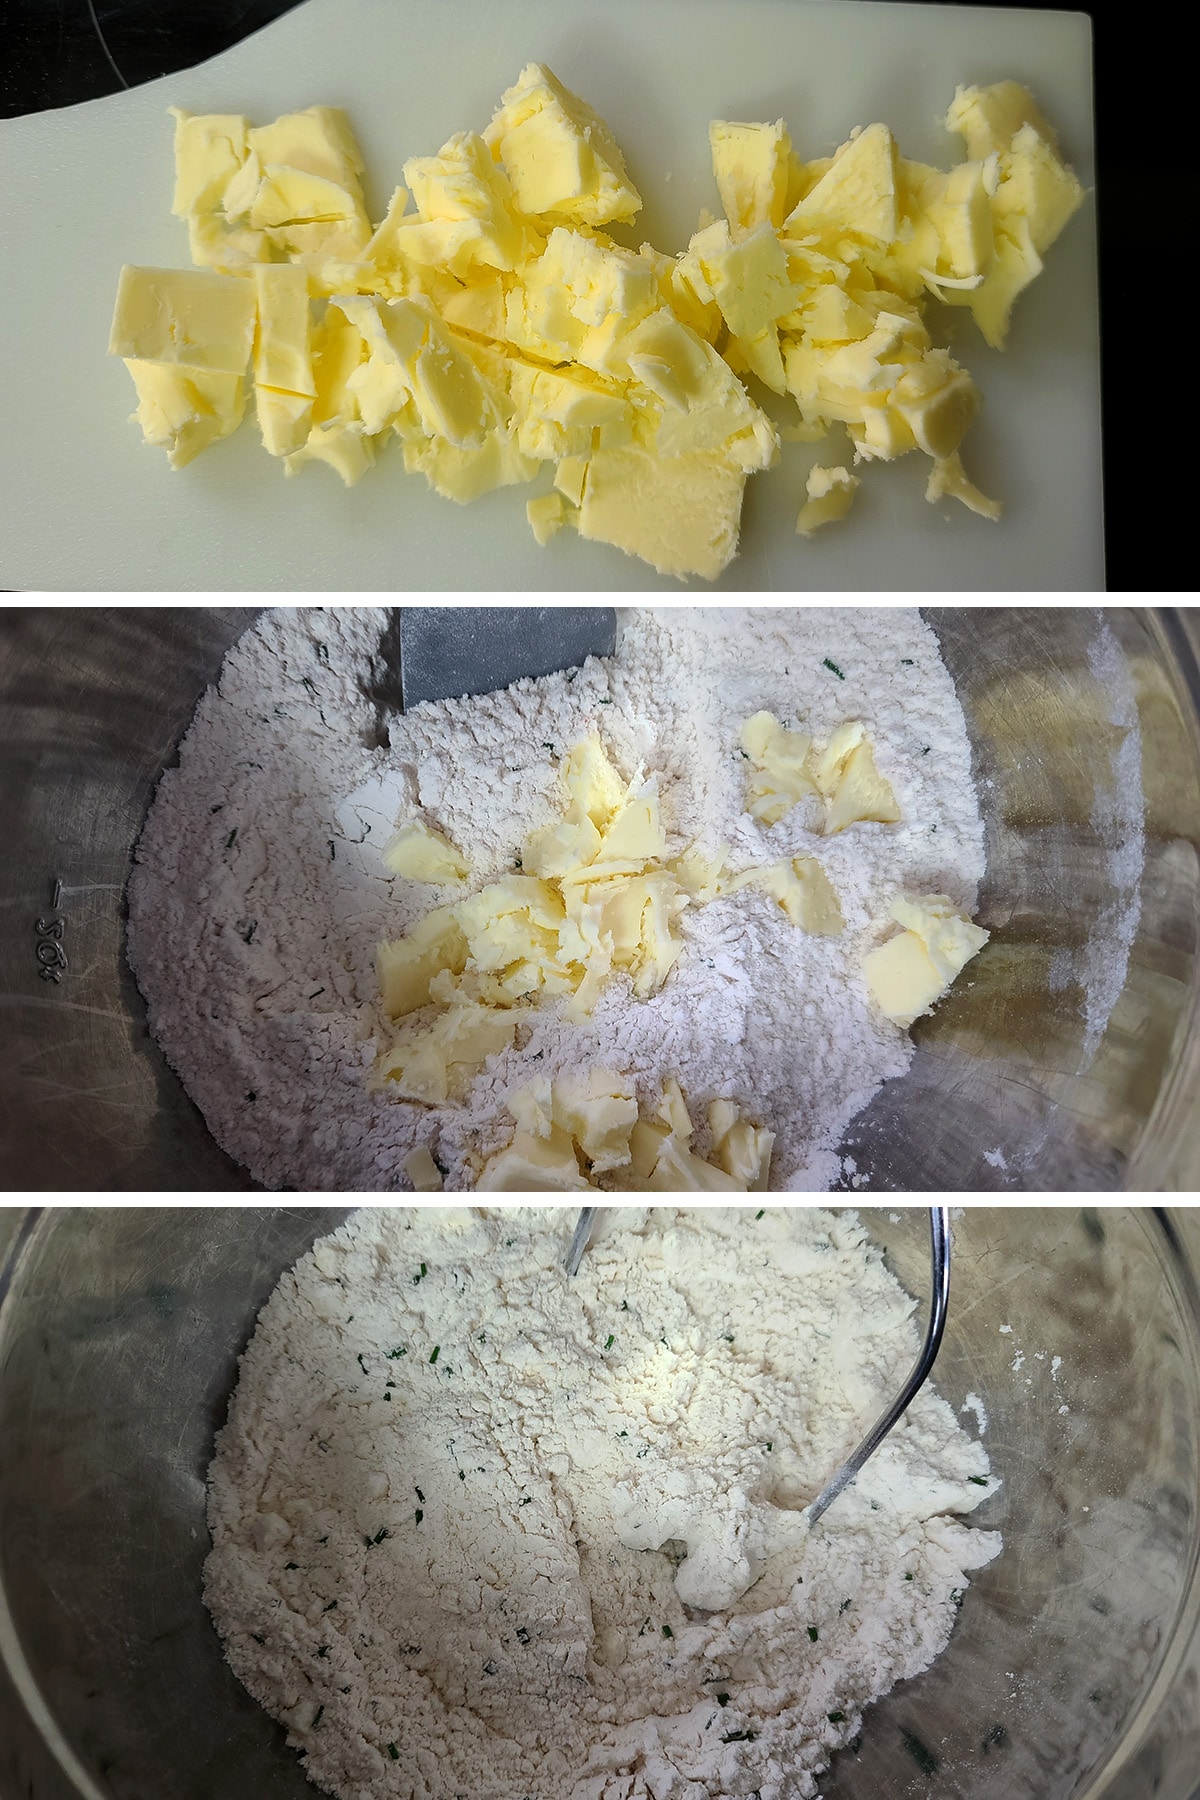 A three part compilation image showing cold butter chopped up, then added to the dry ingredients, and after it's been cut into the mixture.